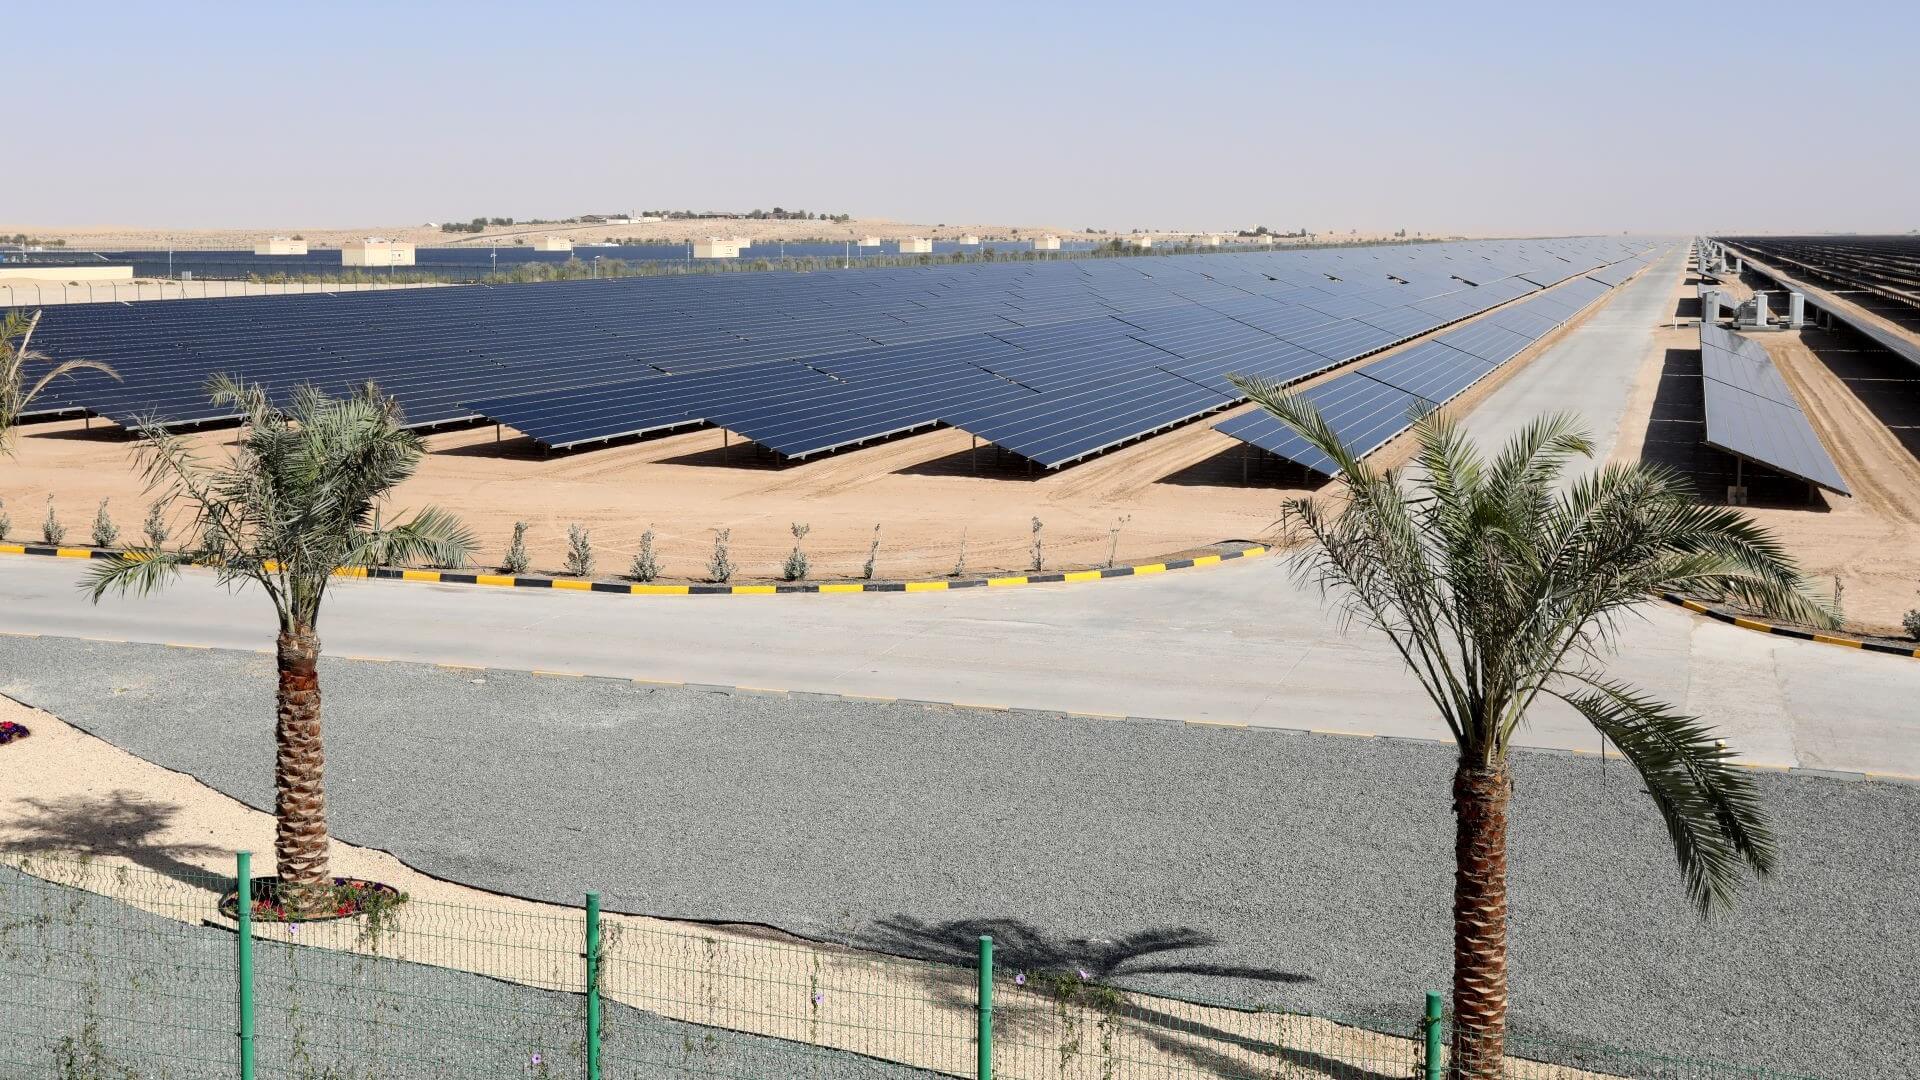 Rows of solar panels in lines in desert with a few palm trees in foreground